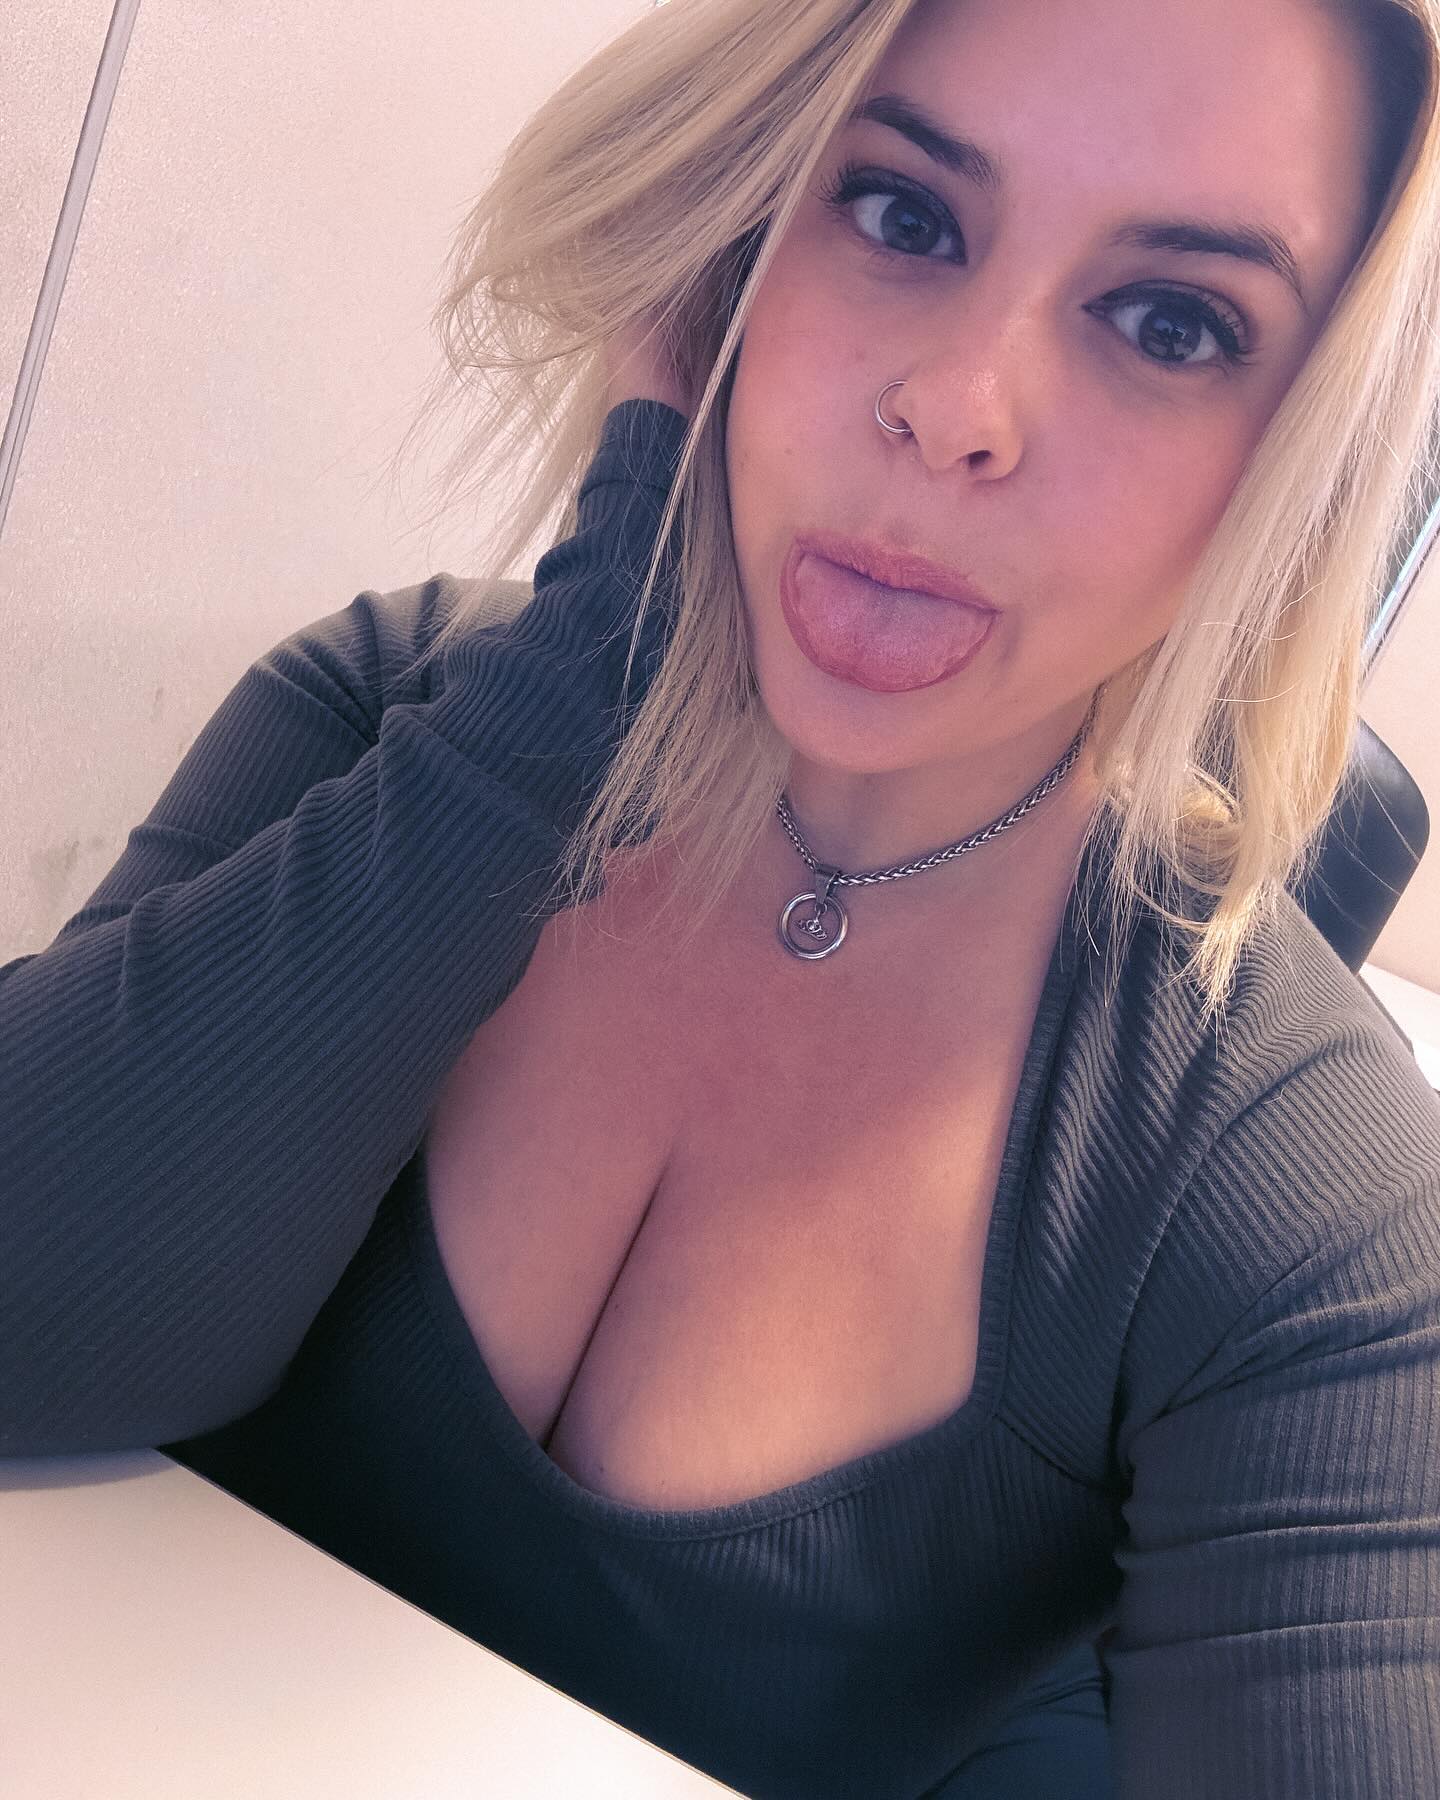 #humpday